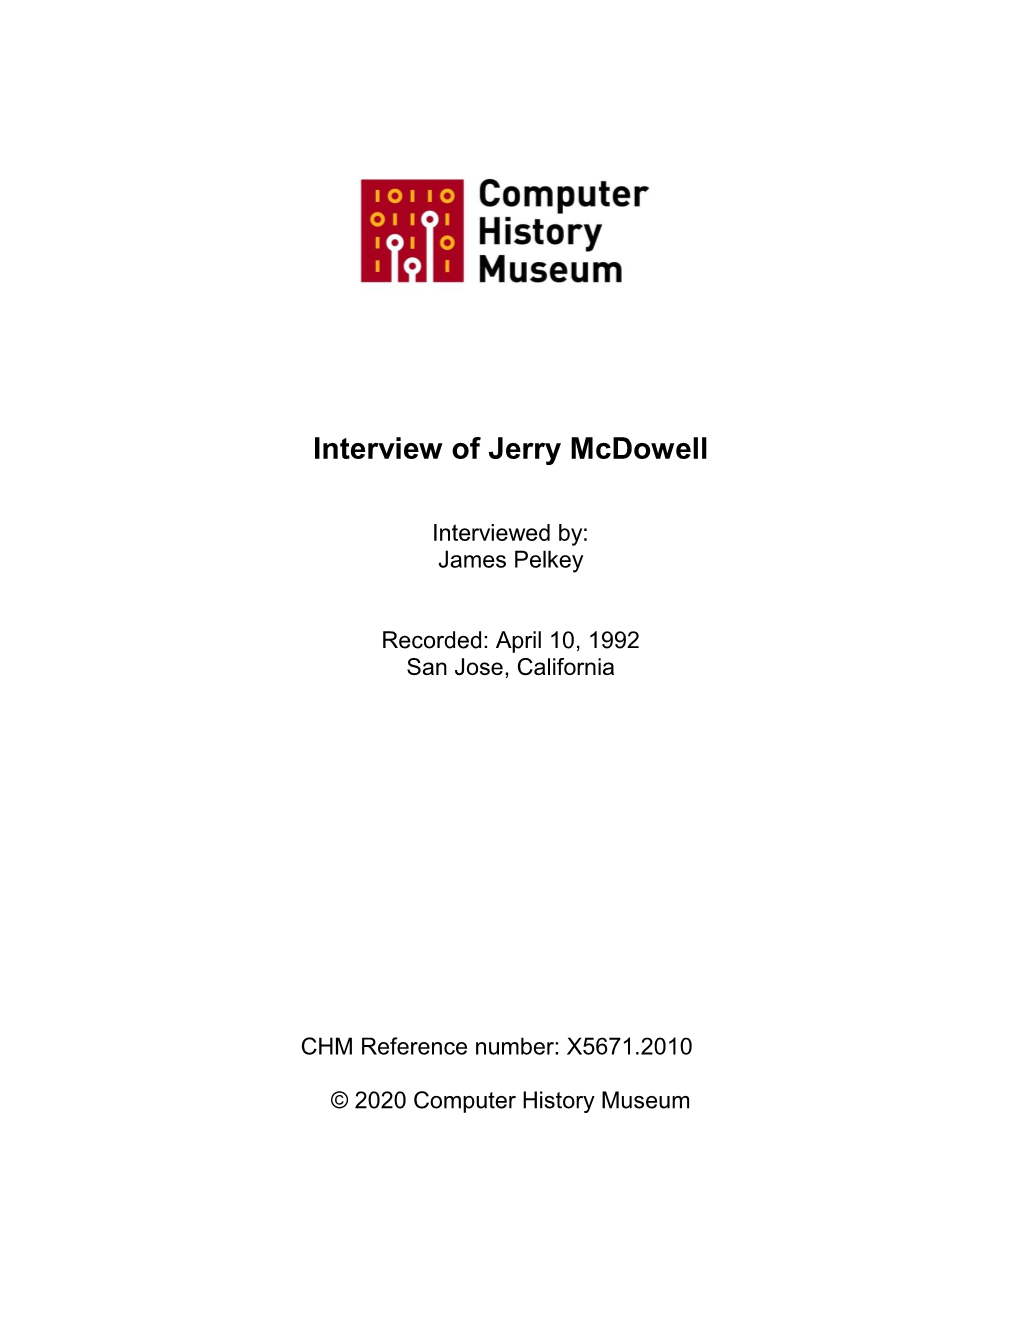 Interview of Jerry Mcdowell